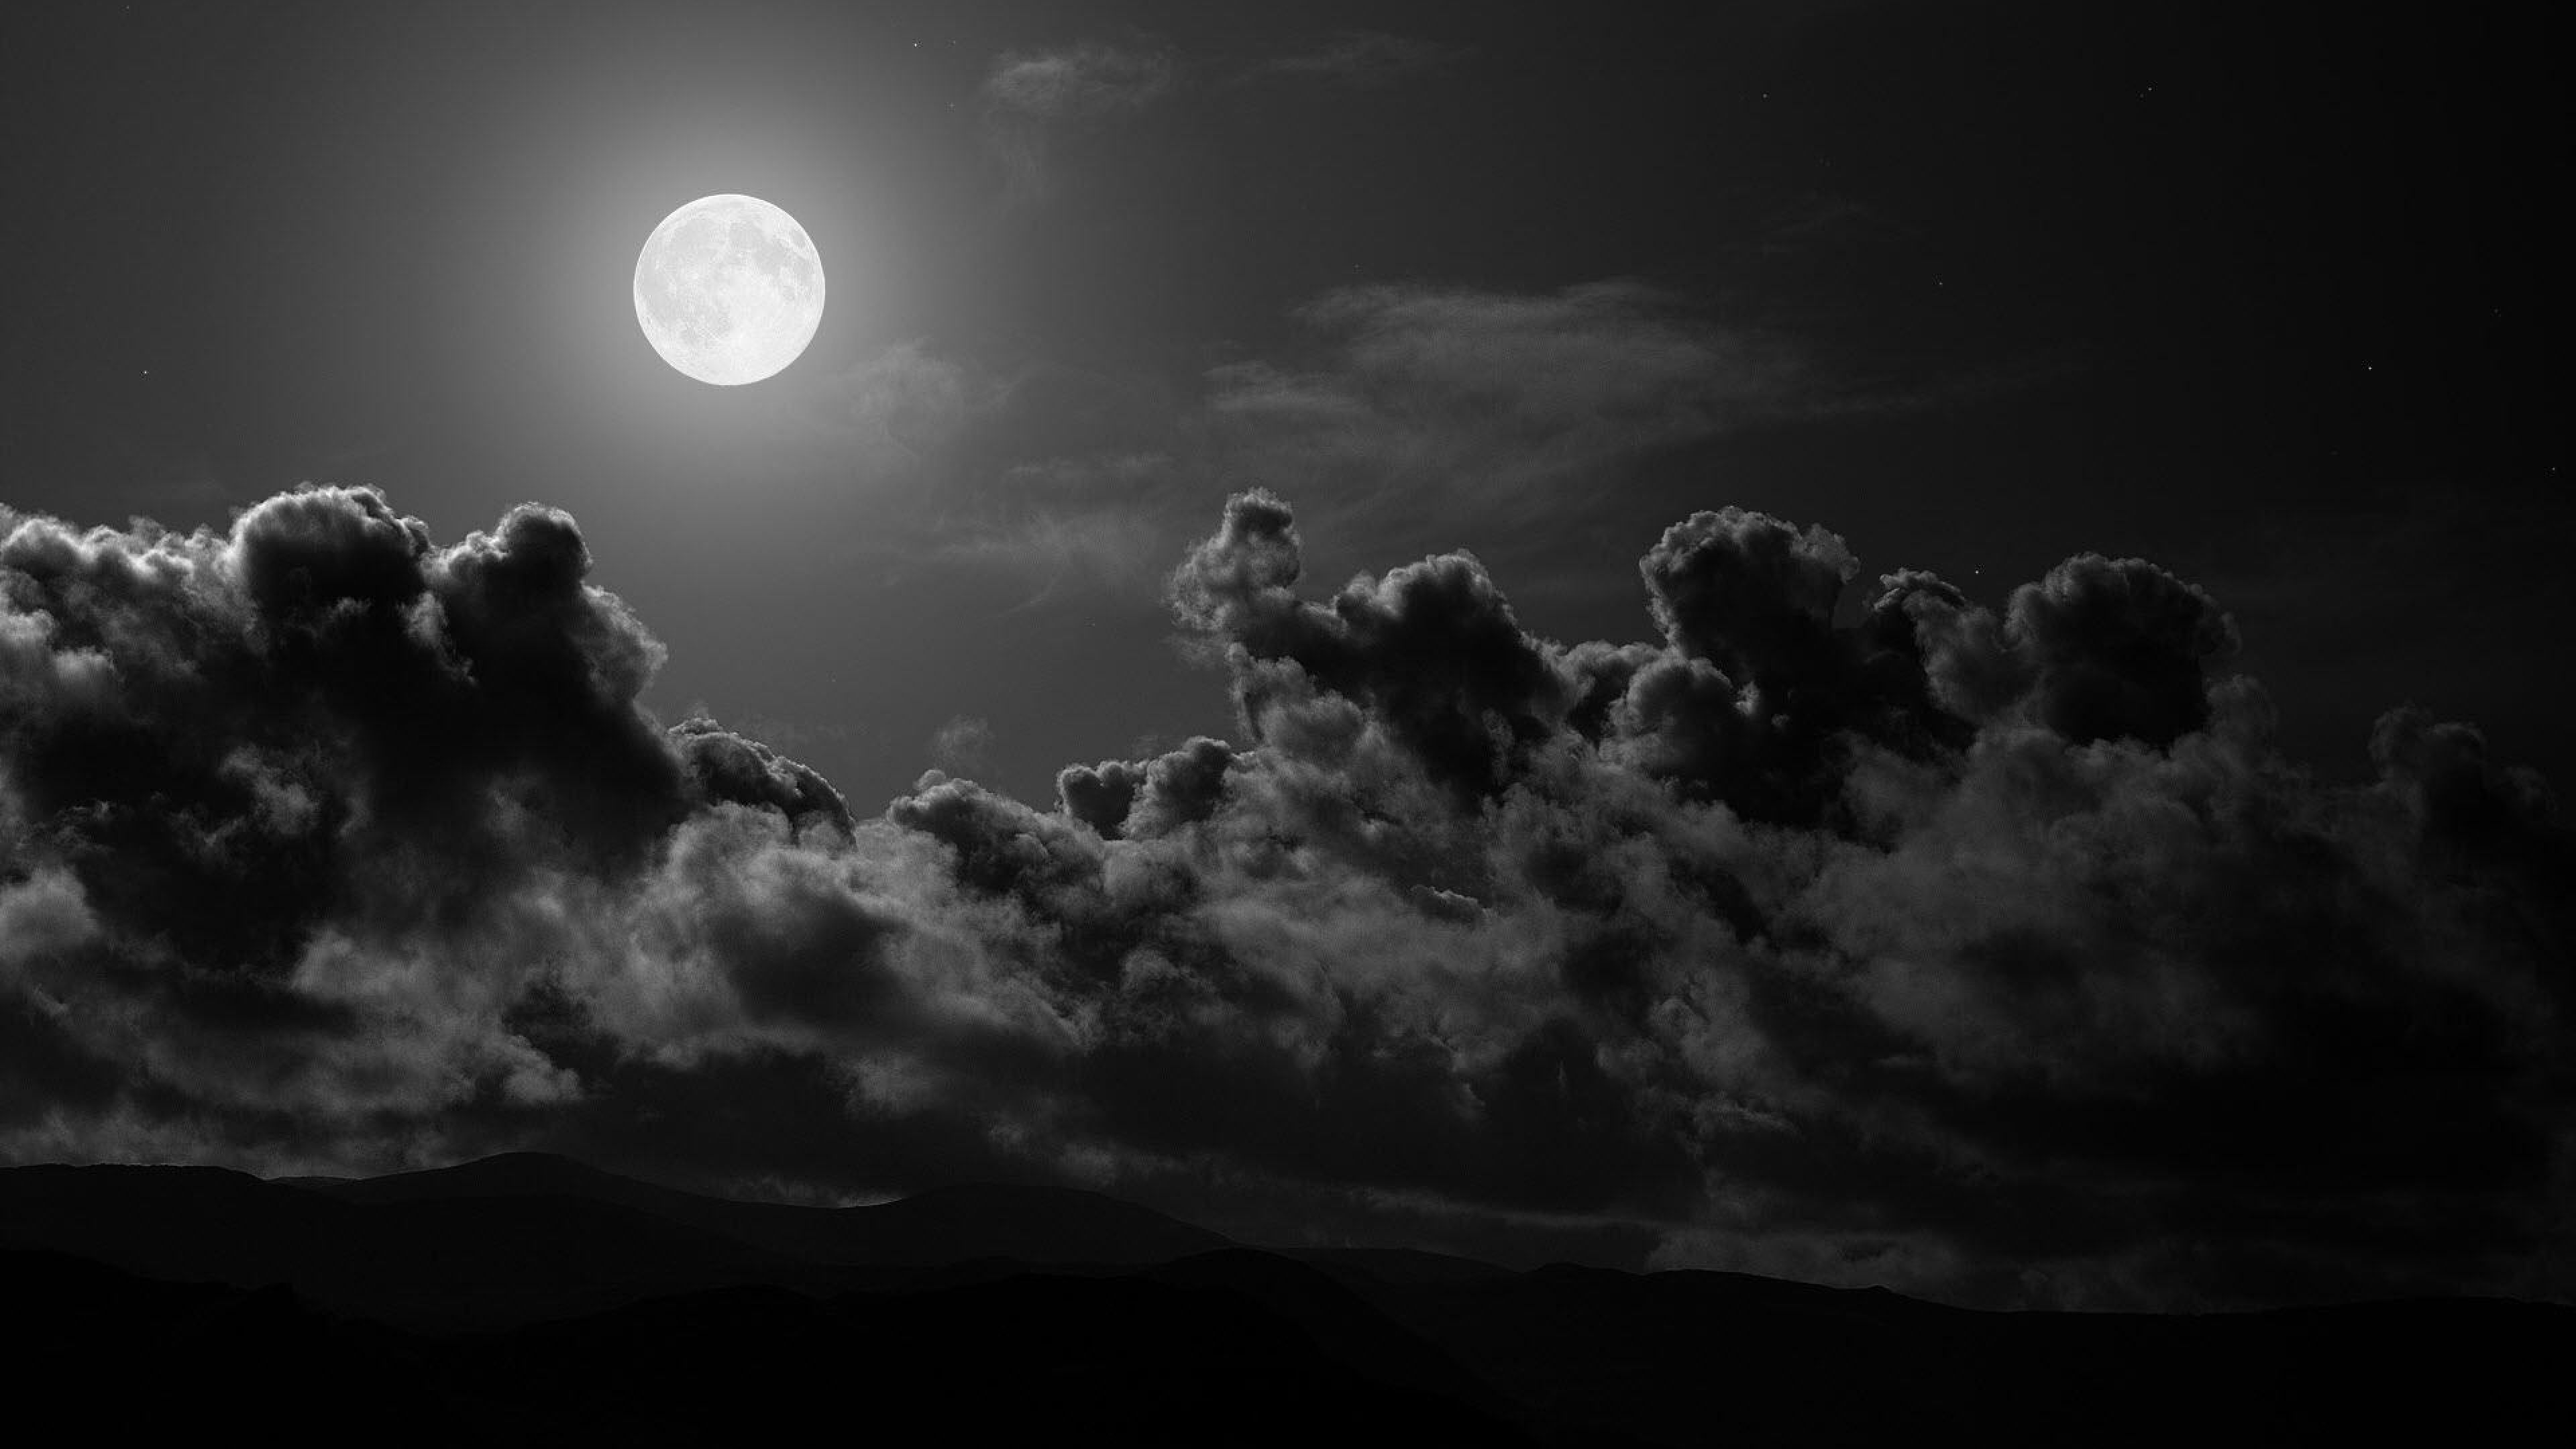 Download Wallpaper 3840x2160 Moon, Clouds, Sky, Black and white 4K